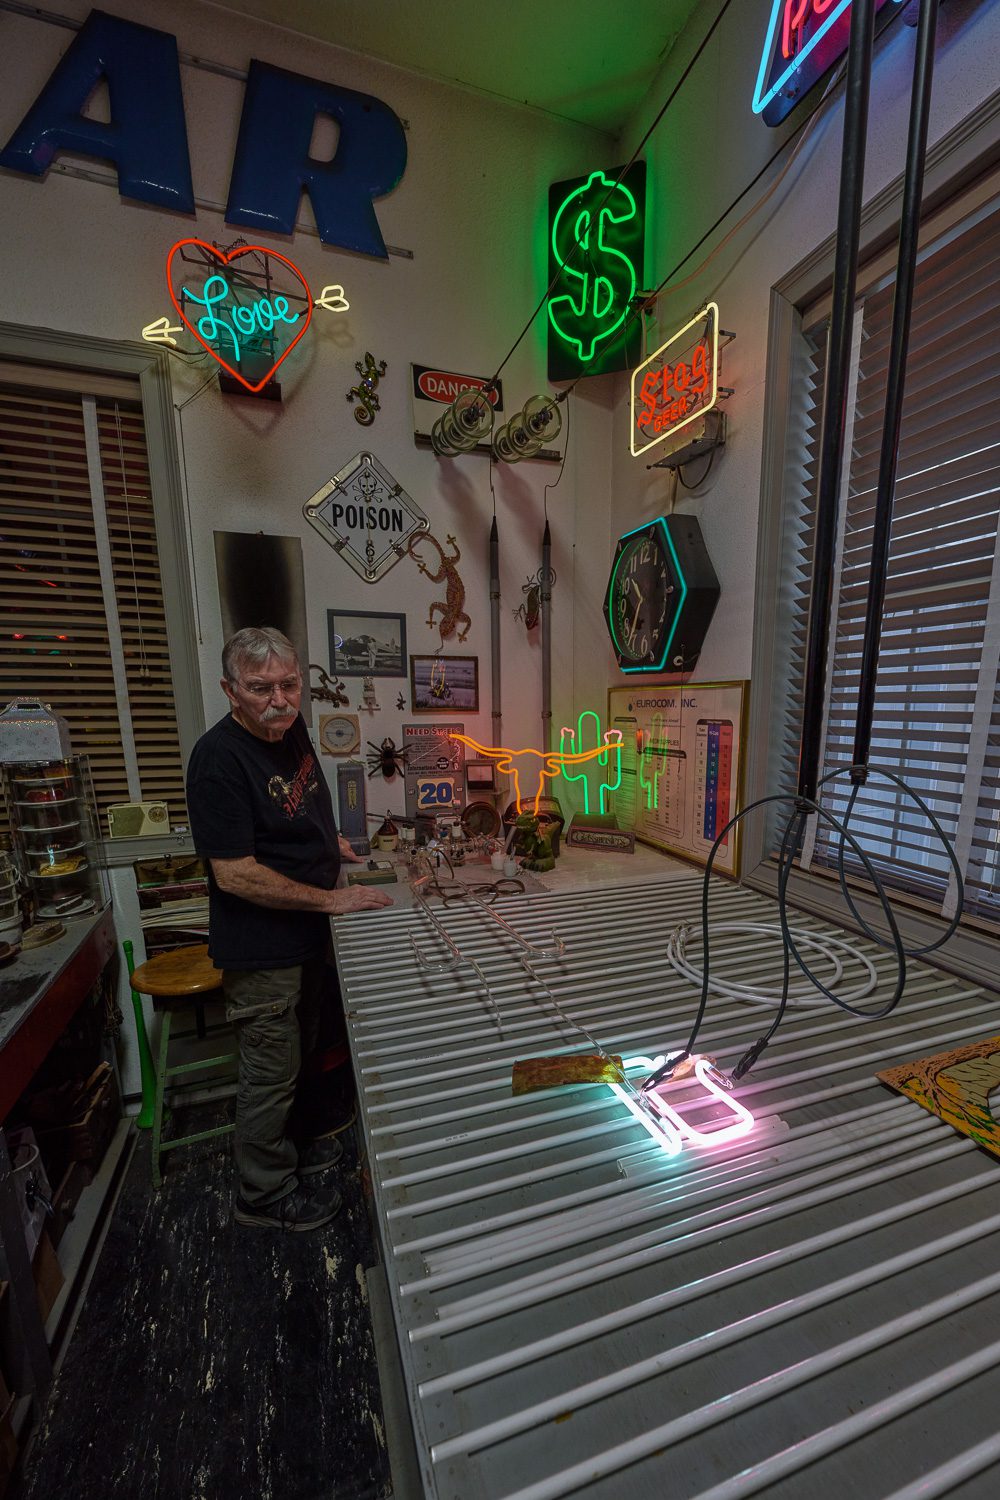 A new neon sign piece is hooked up to electricity and heated to 600 degrees.